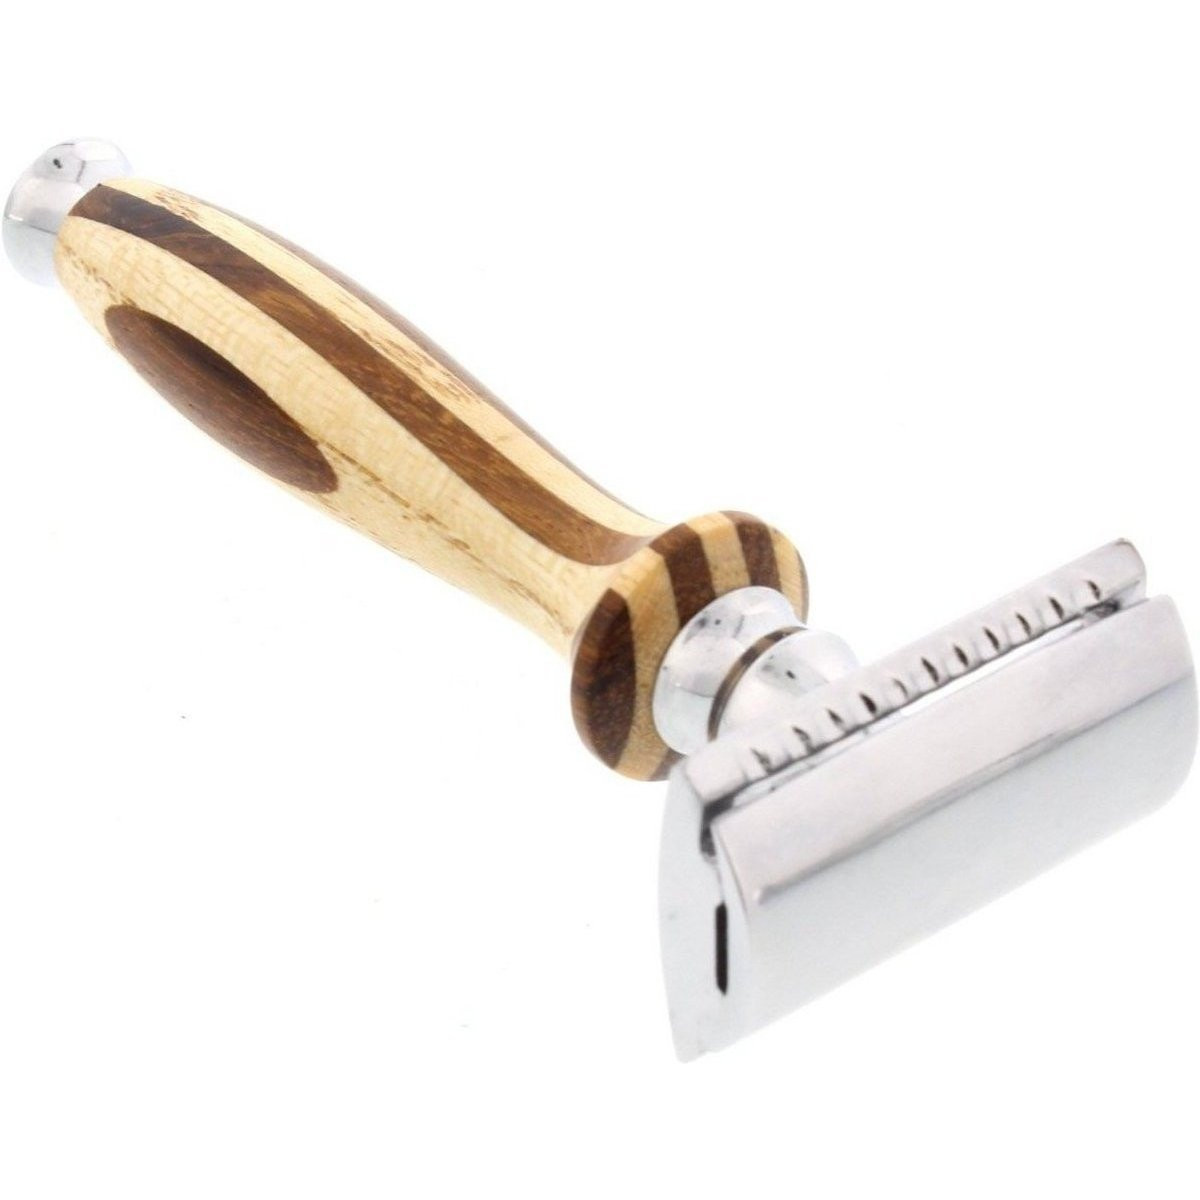 Product image 1 for WCS Natural Collection Razor 38WS, Rosewood & White Ash